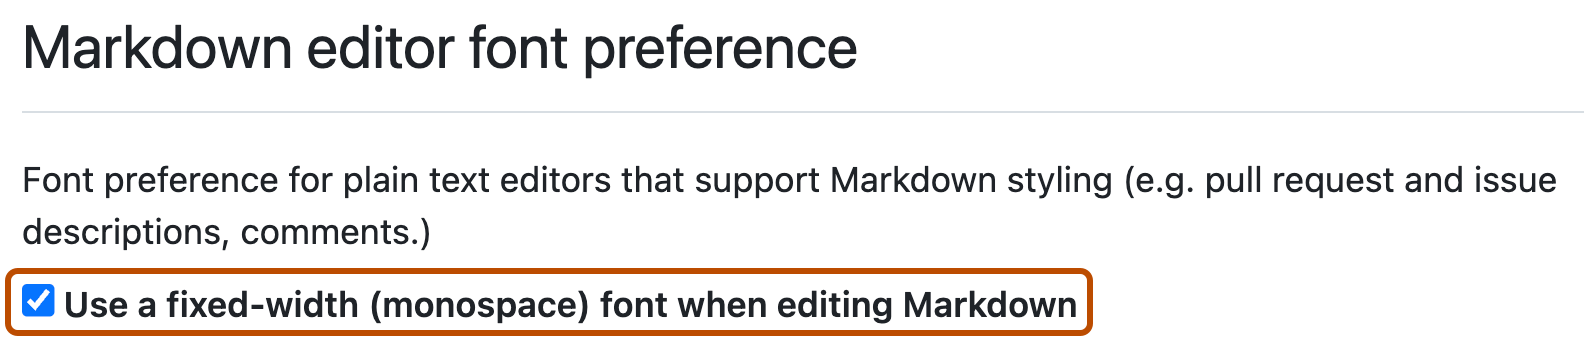 Screenshot of GitHub user settings for Markdown preference. The checkbox to use a fix-width font in Markdown is checked and outlined in dark orange.